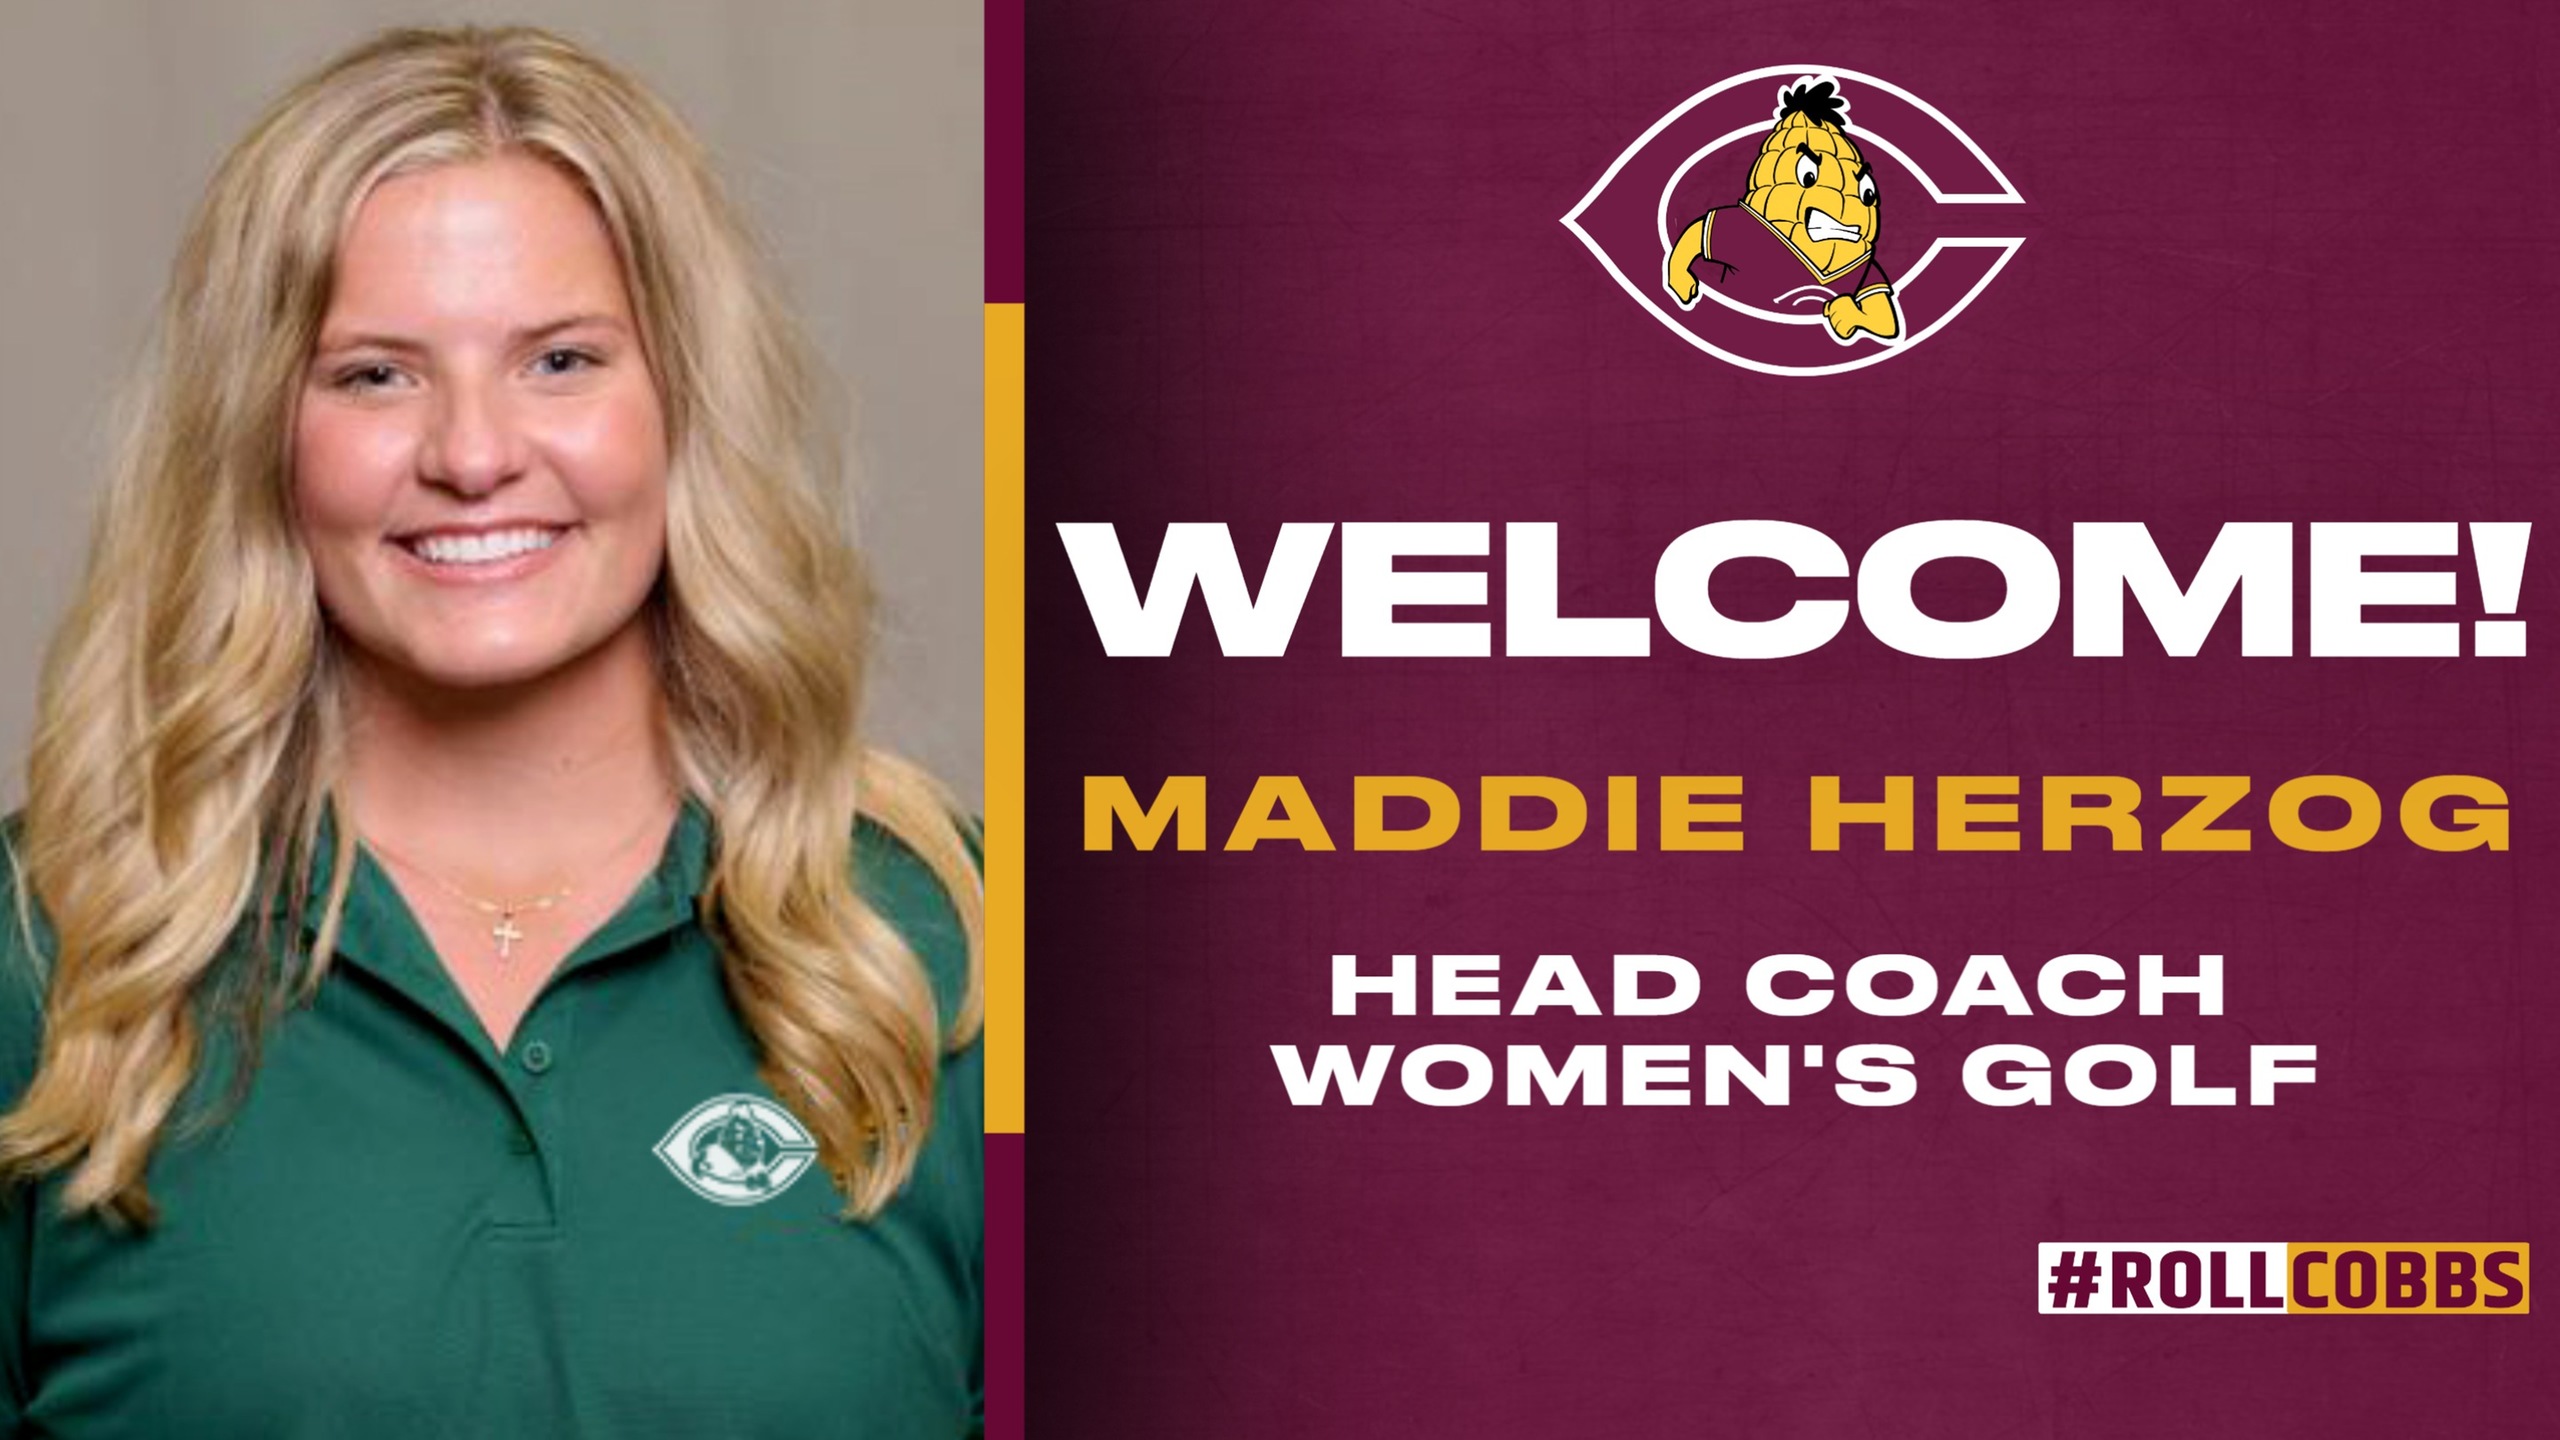 Maddie Herzog has been hired as the new head coach for the Cobber women's golf program. She played for NDSU for five seasons.